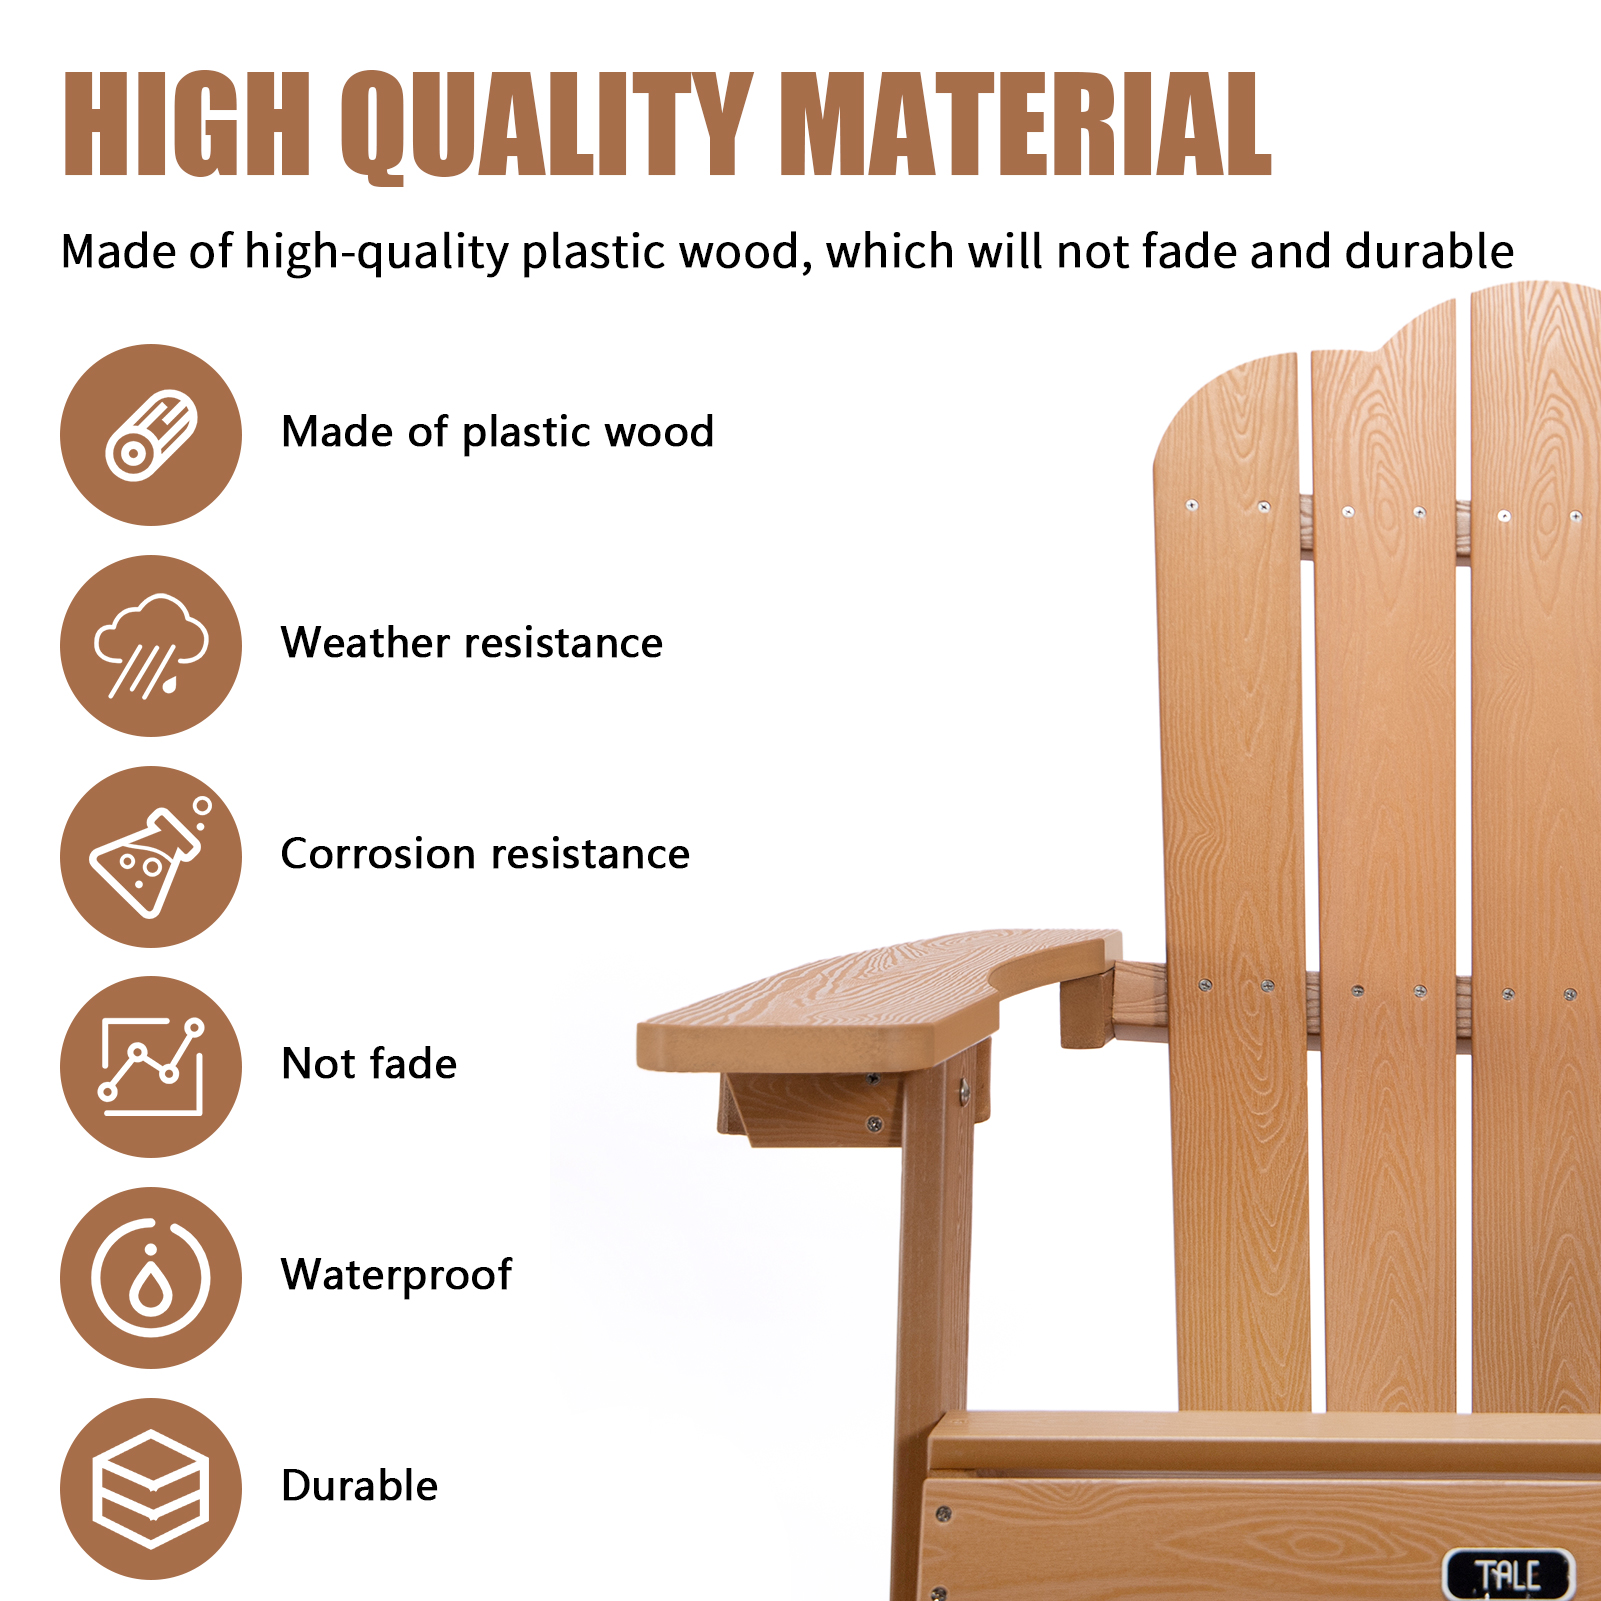 CoSoTower Adirondack Chair Backyard Outdoor Furniture Painted Seating with Cup Holder All-Weather and Fade-Resistant Plastic Wood for Lawn Patio Deck Garden Porch Lawn Furniture Chairs Brown - image 3 of 7